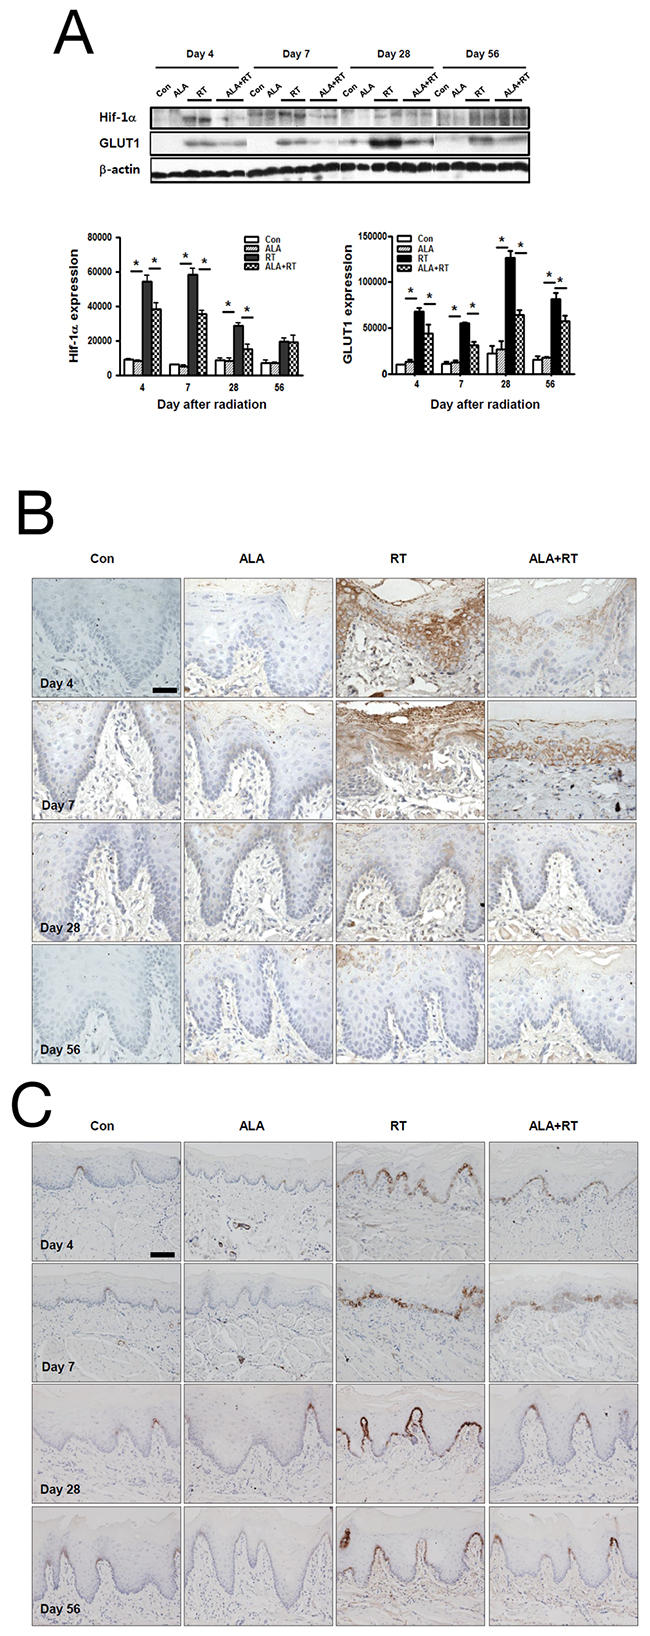 ALA decreases Hif-1a and GLUT1 expression in the oral mucosa.